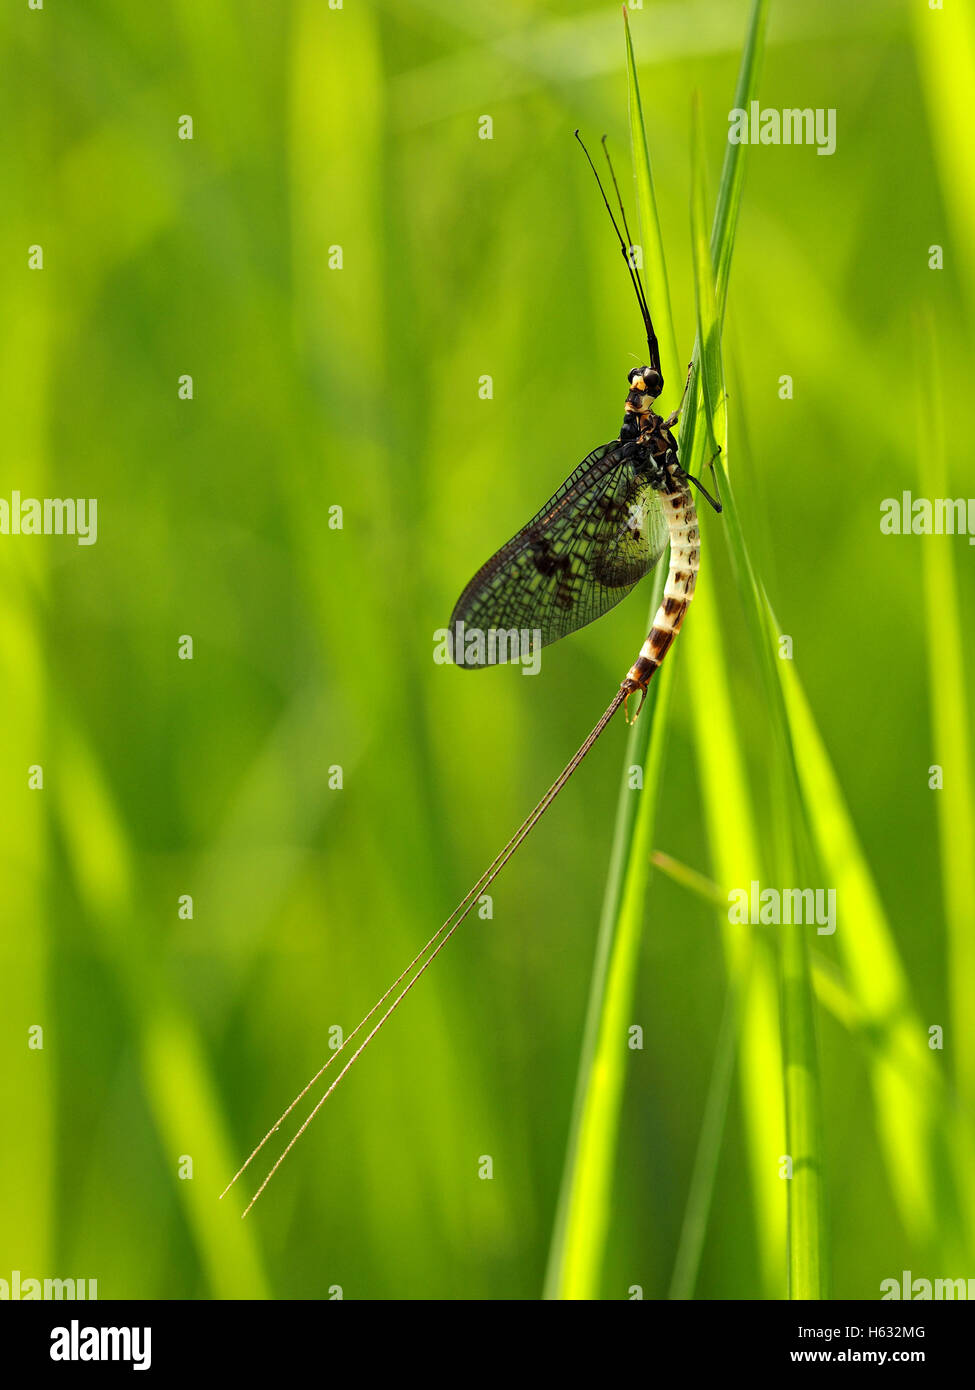 portrait format image of Mayfly Ephemeroptera sp - long jointed antennae black eyes two long tails cream & brown spotted abdomen Stock Photo